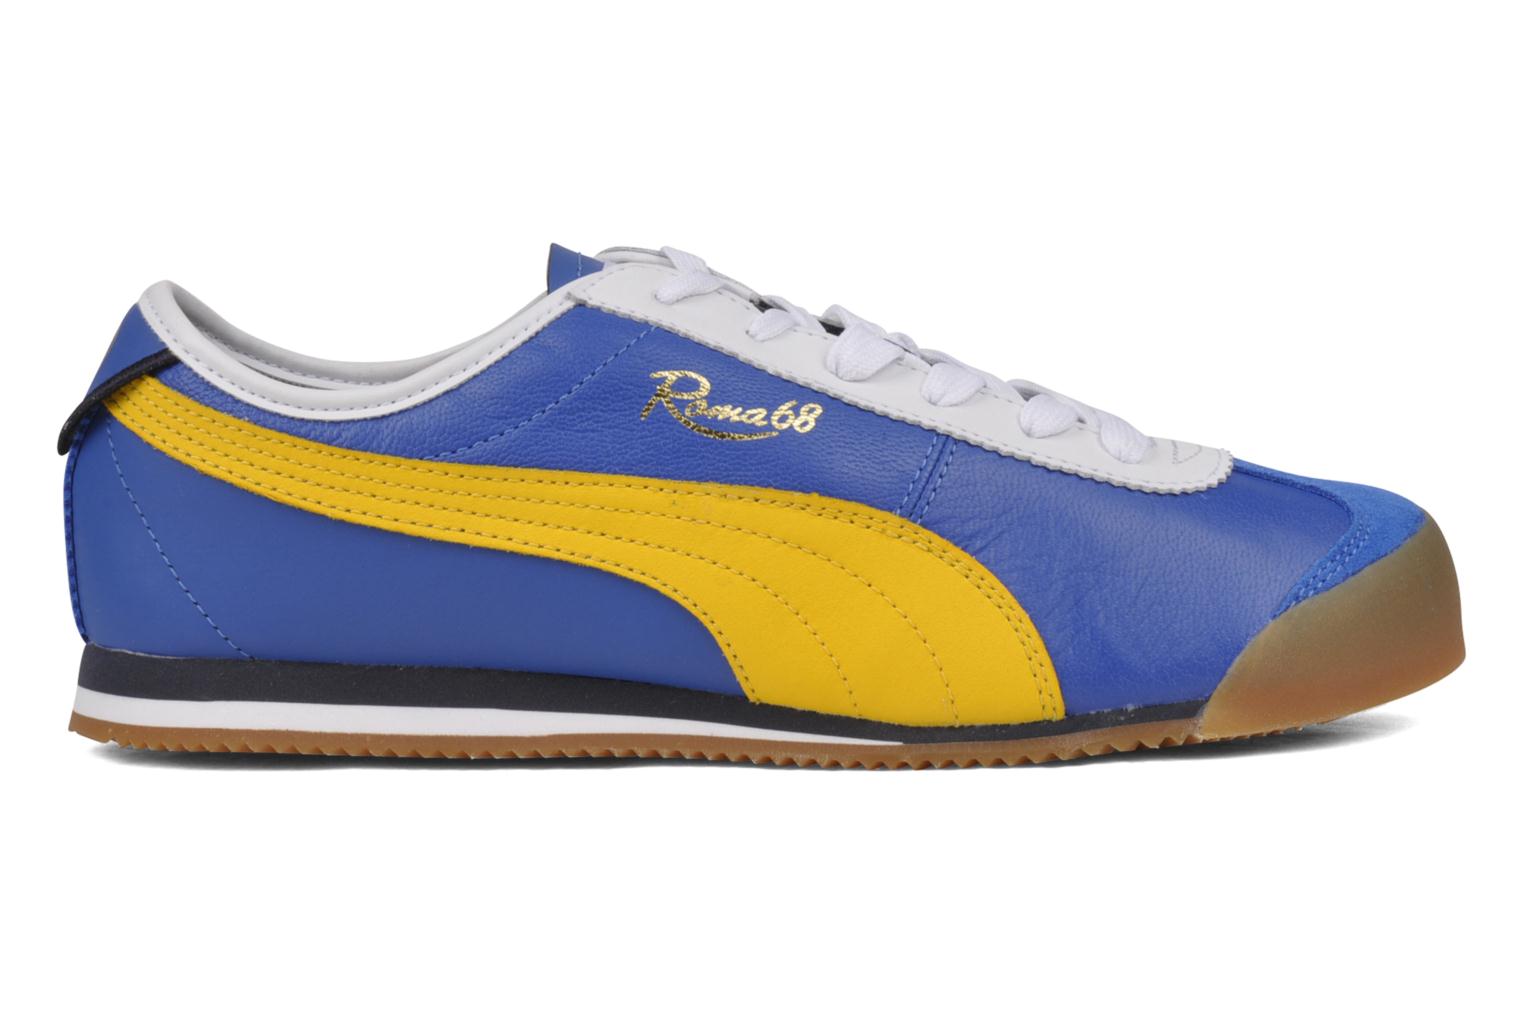 Puma Roma 68 Vintage Trainers in Blue at Sarenza.co.uk (34812)